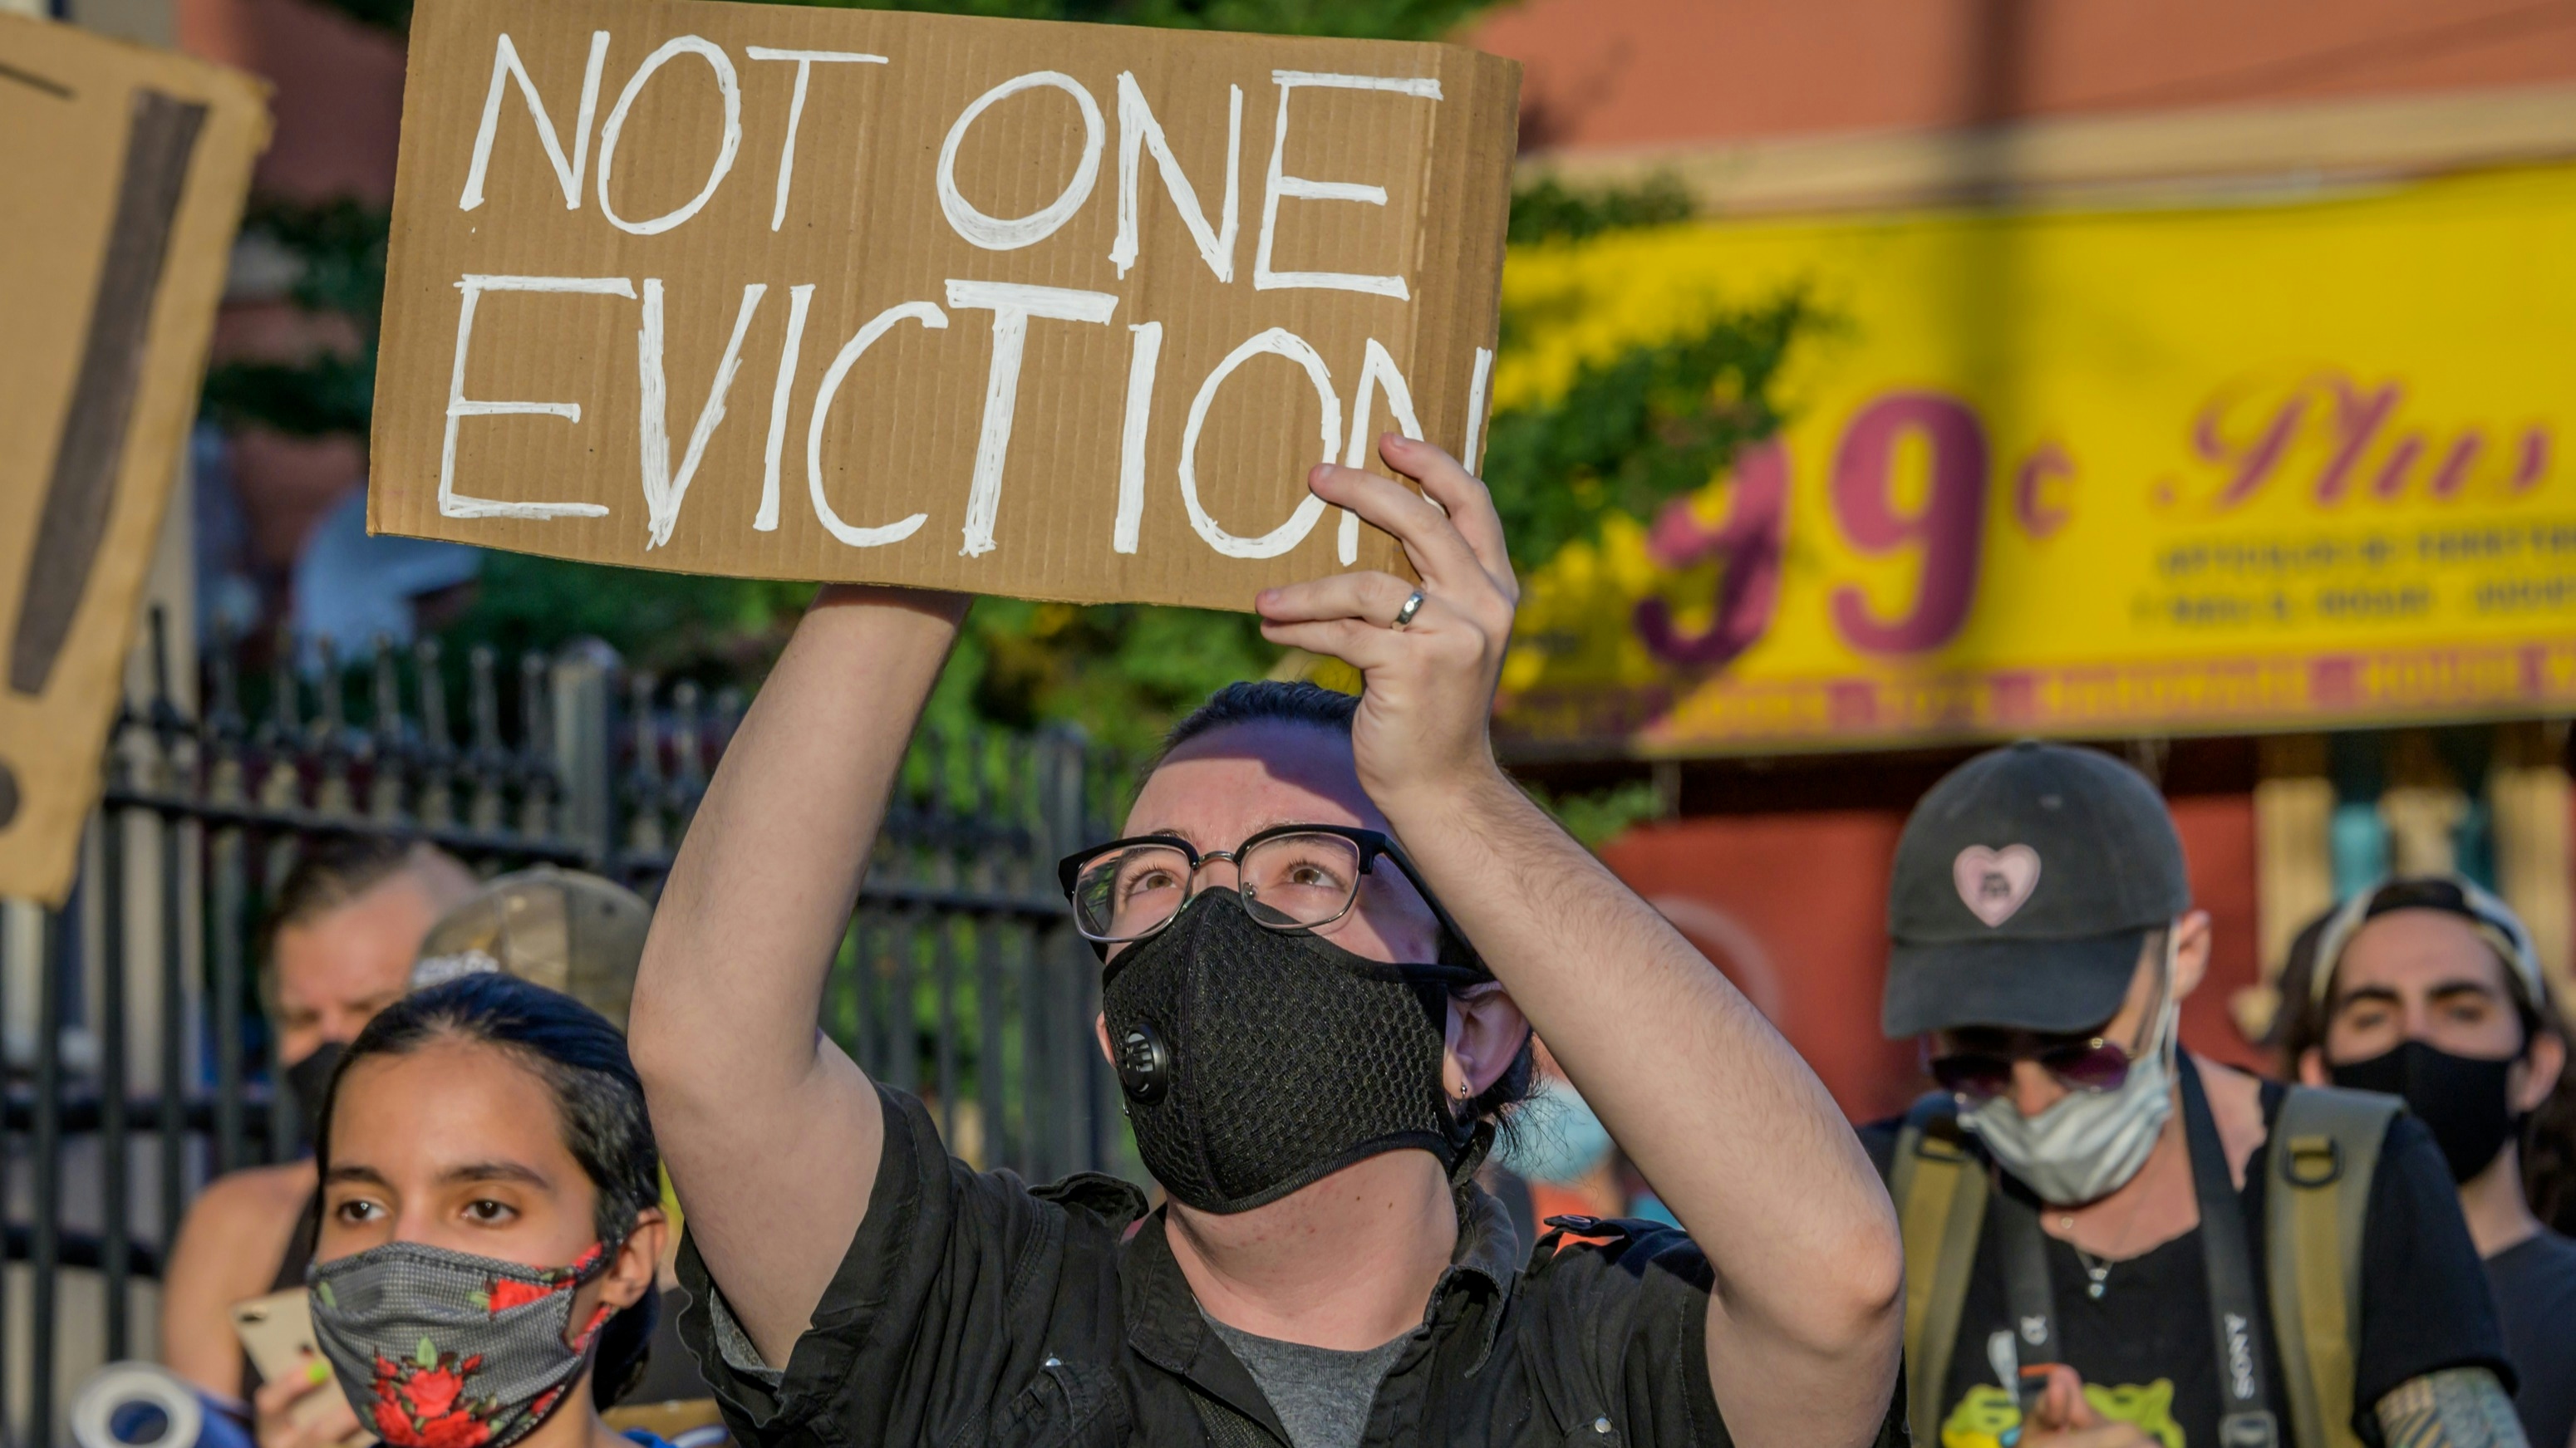 A participant holding a Not One Eviction sign at the protest